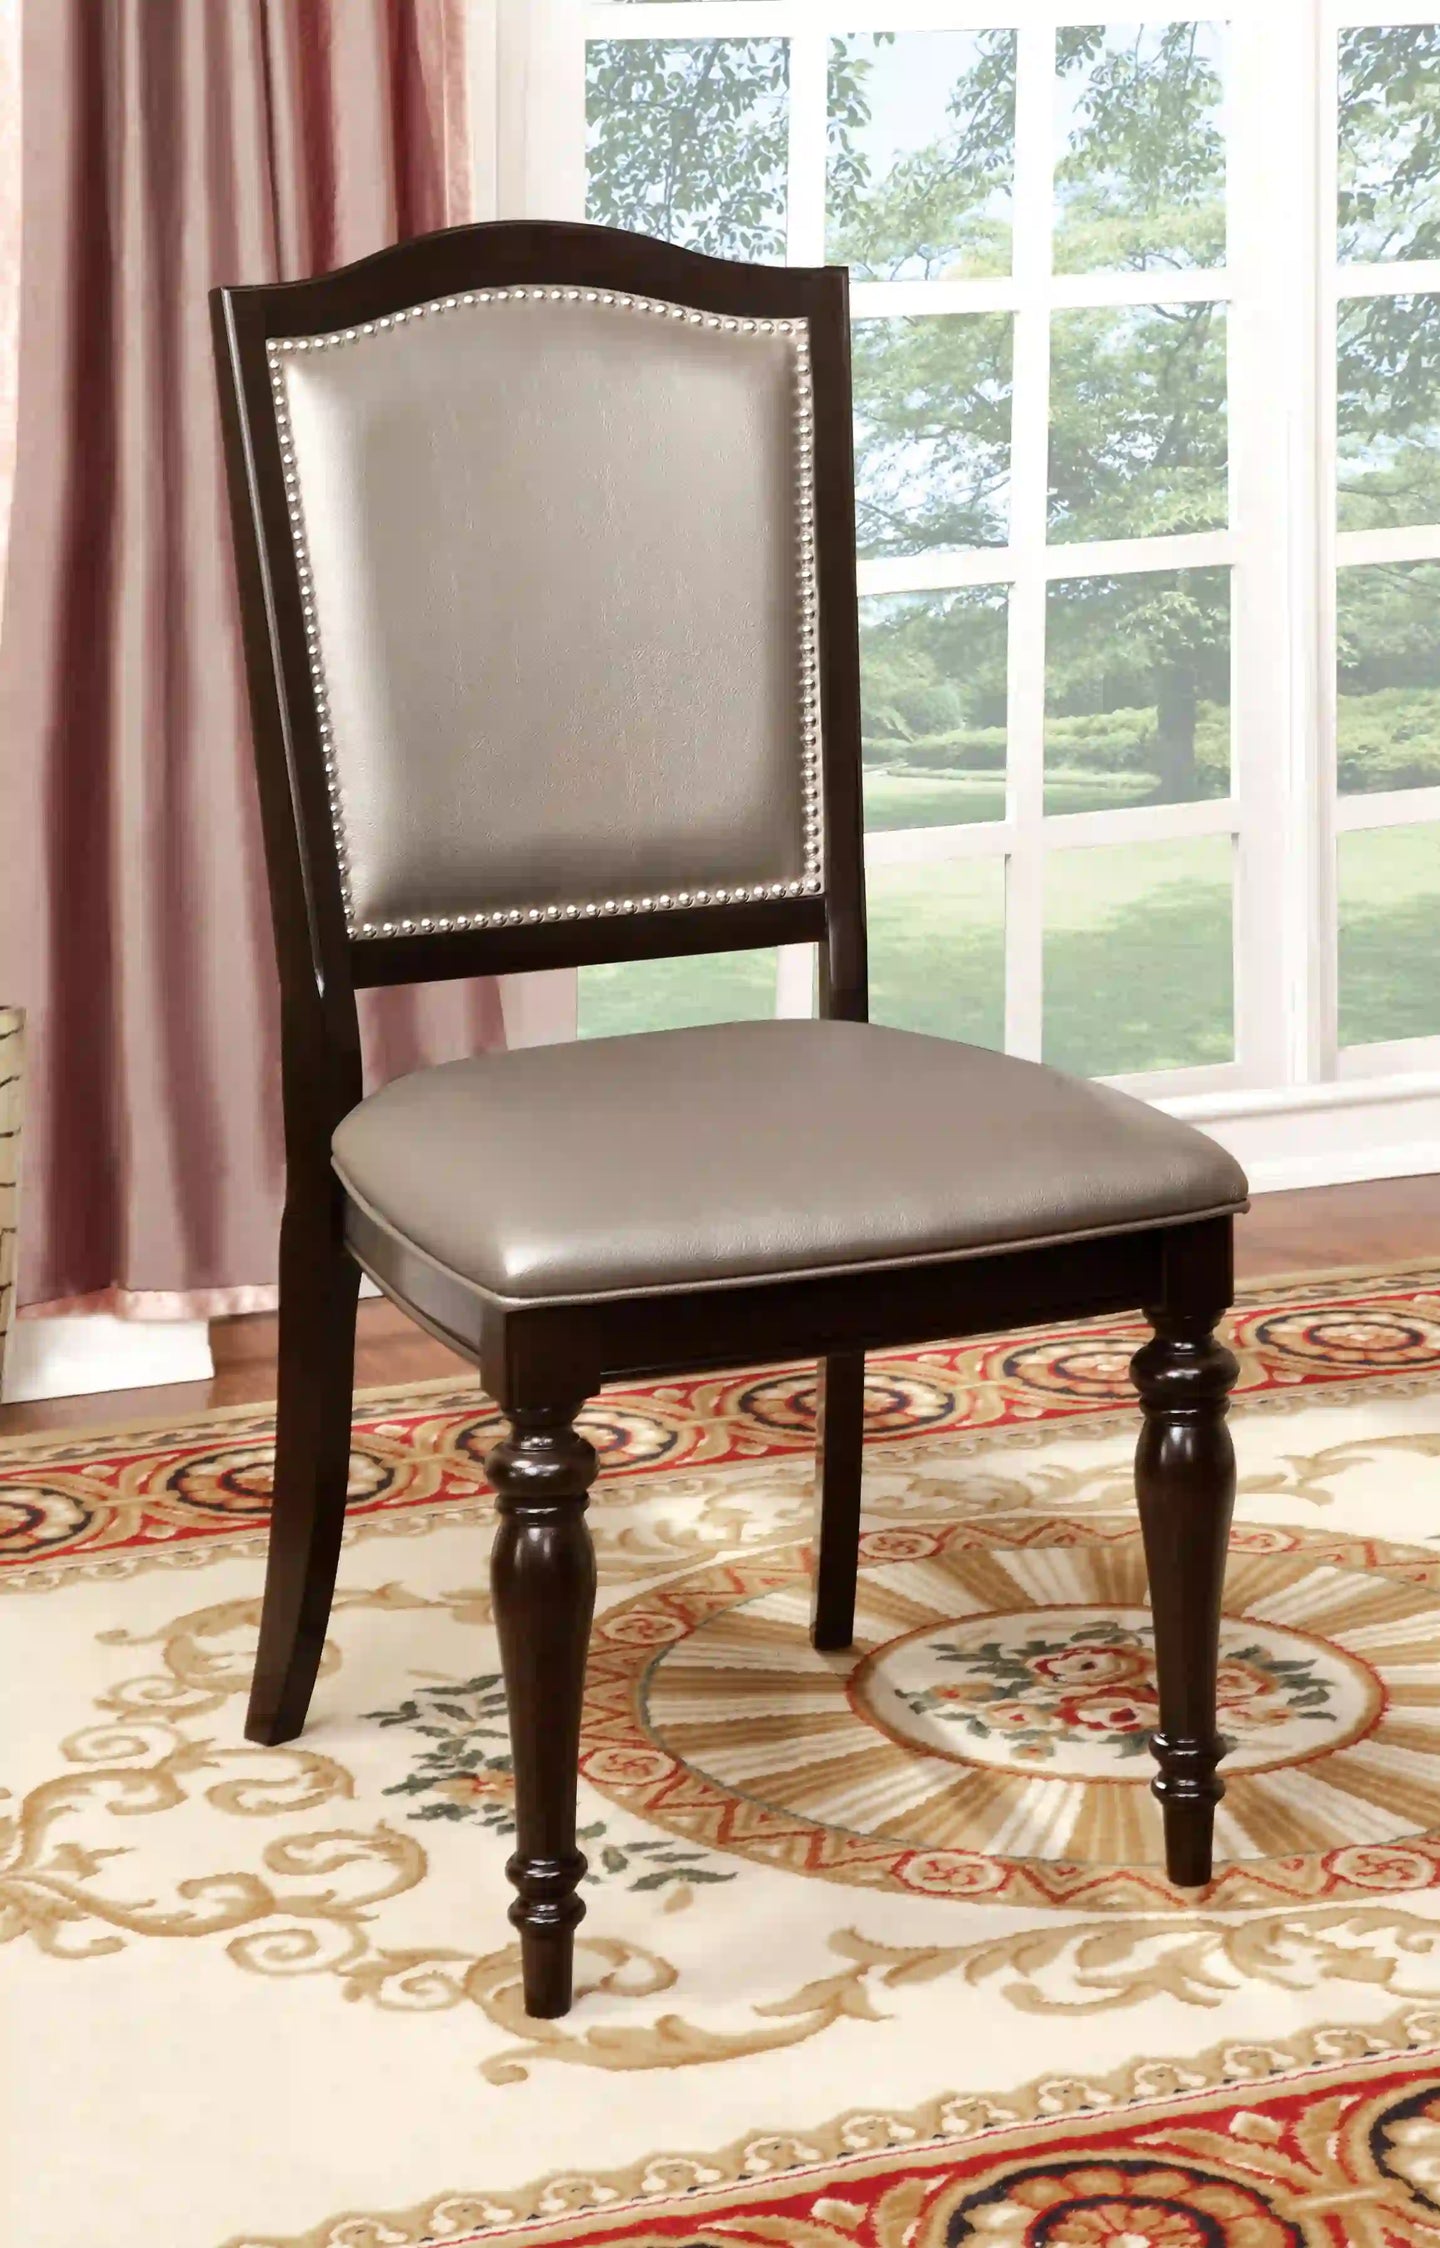 Furniture of America Harry Transitional Faux Leather Padded Side Chairs (Set of 2) - IDF-3970SC